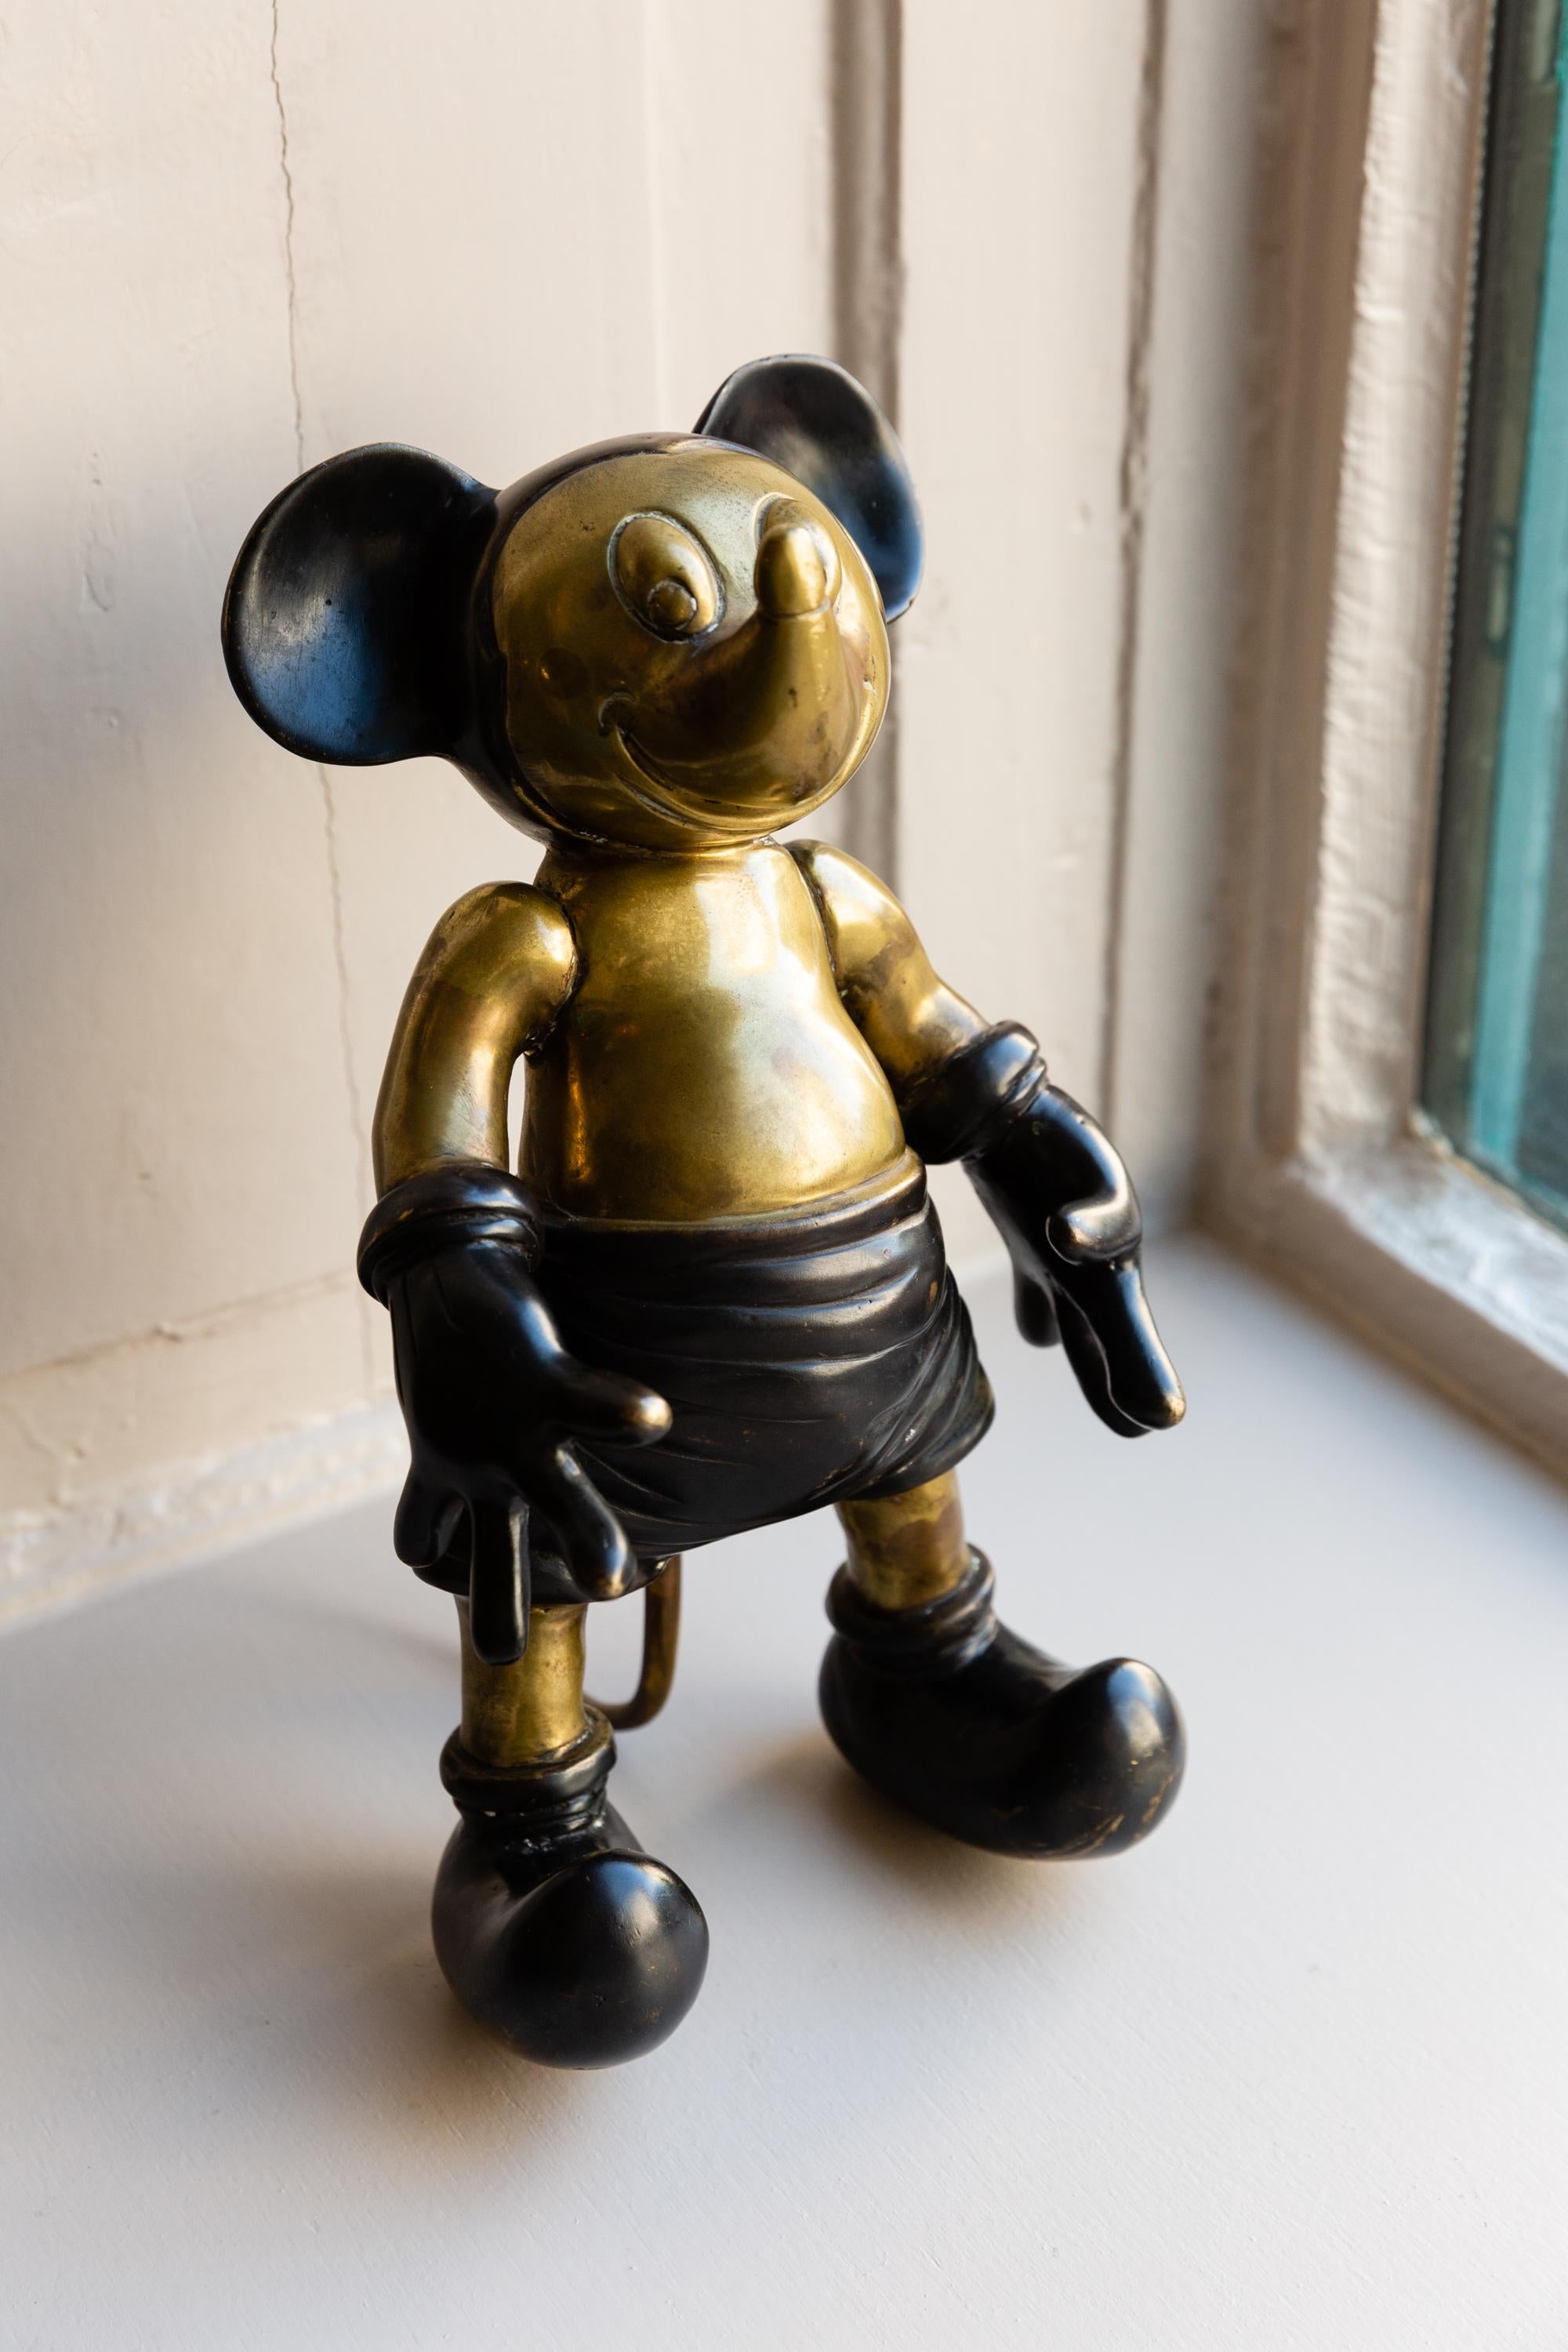 Rare mickey mouse figure, attributed to Hagenauer Vienna, Austria, circa 1930, bronze with black patination, height 25 cm, depth 15 cm, width 15 cm, very good vintage condition.
 